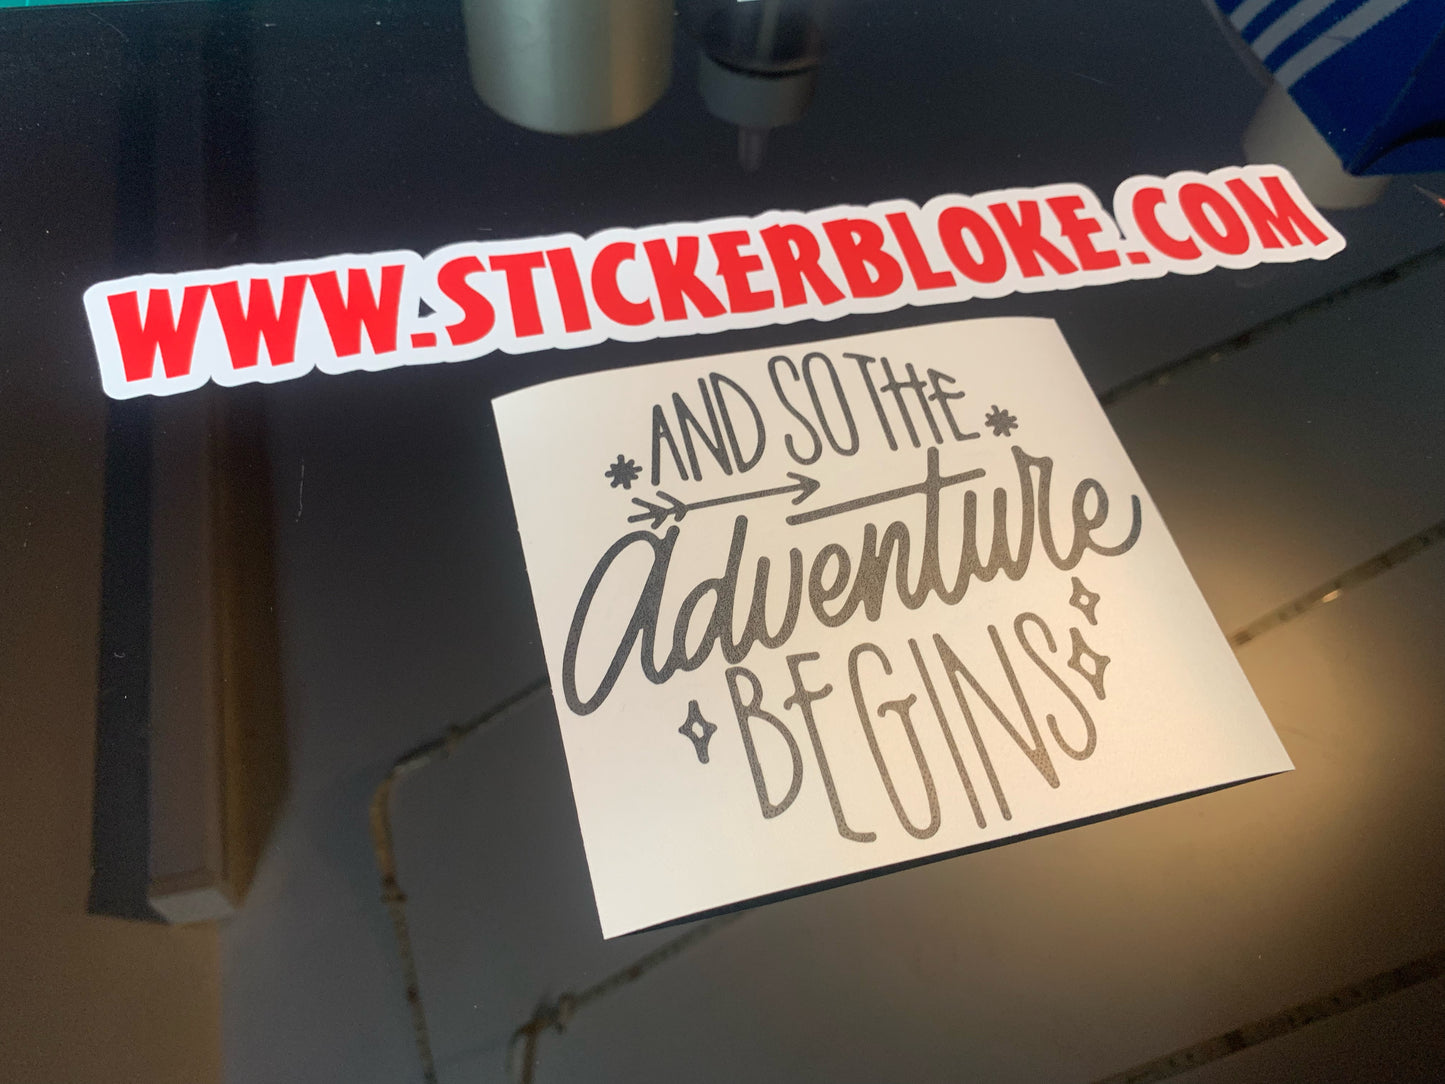 AND SO THE ADVENTURE BEGINS STICKER